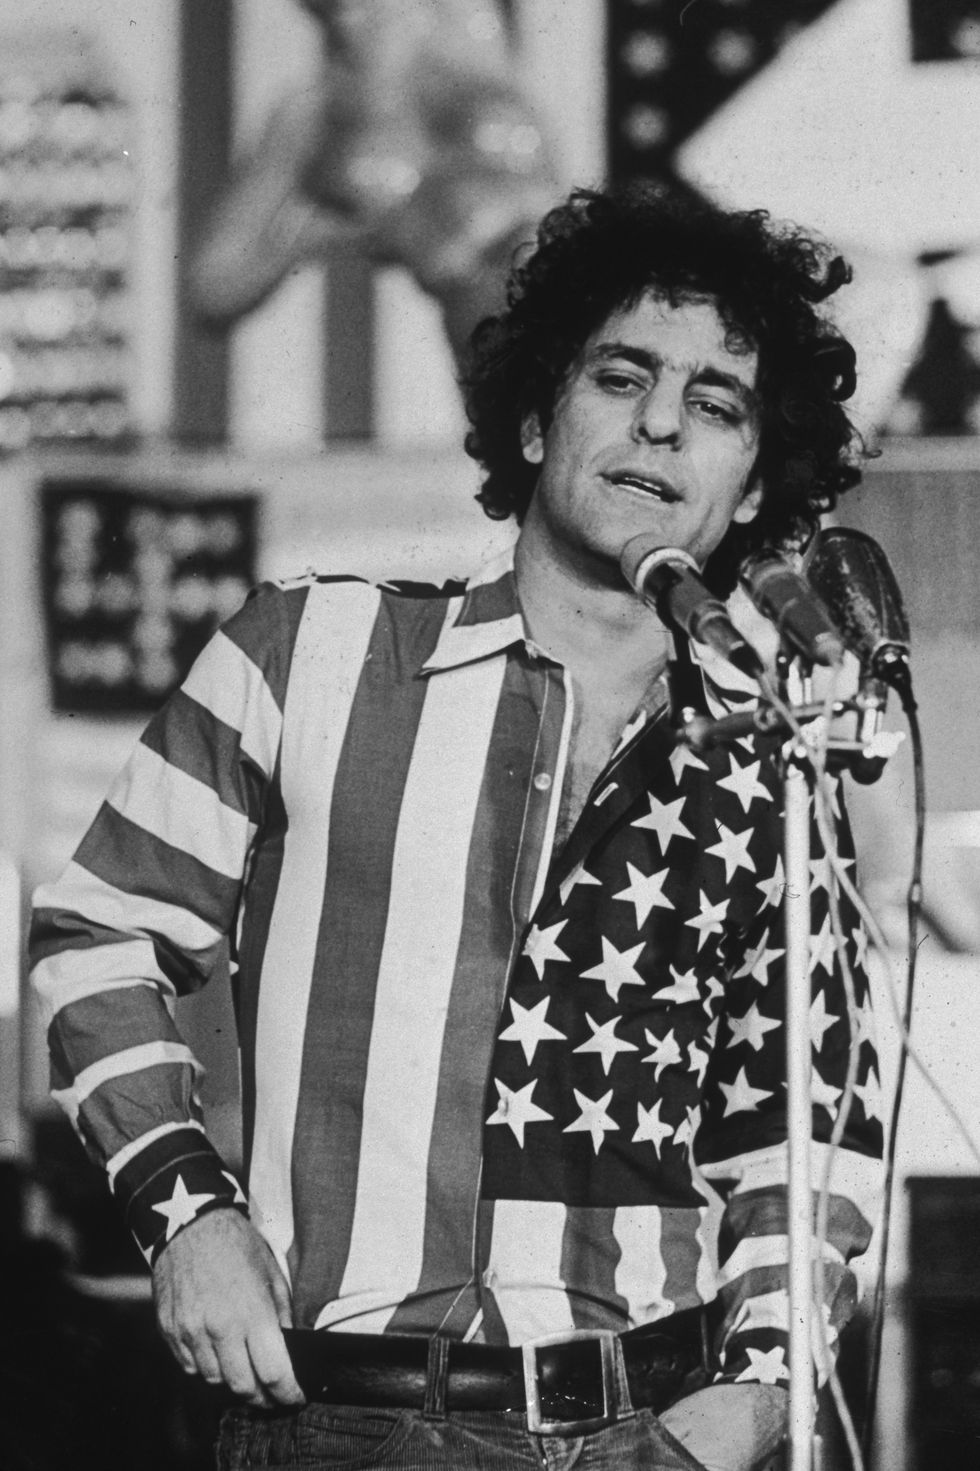 9th november 1970  political activist abbie hoffman 1936   1989, wearing a shirt made from an  american flag, speaks at a us flag themed art show at the hudson memorial church, new york city hoffman was charged with desecration of the flag for wearing a us flag shirt  photo by tyrone dukesnew york times cogetty images